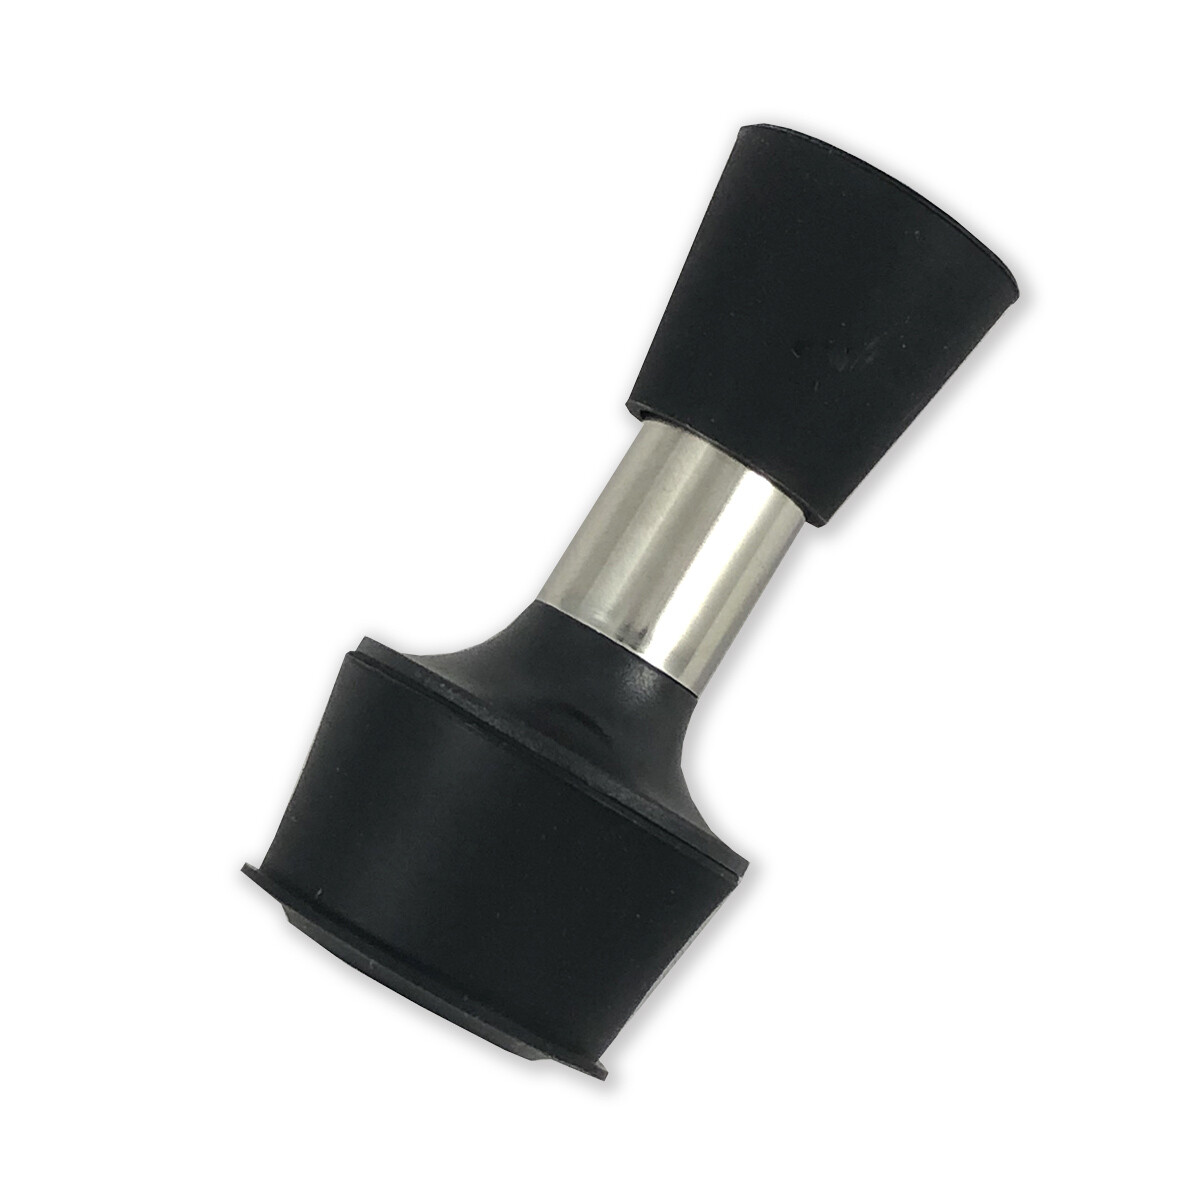 Replacement Spout and Cap for Olive Oil Dispenser